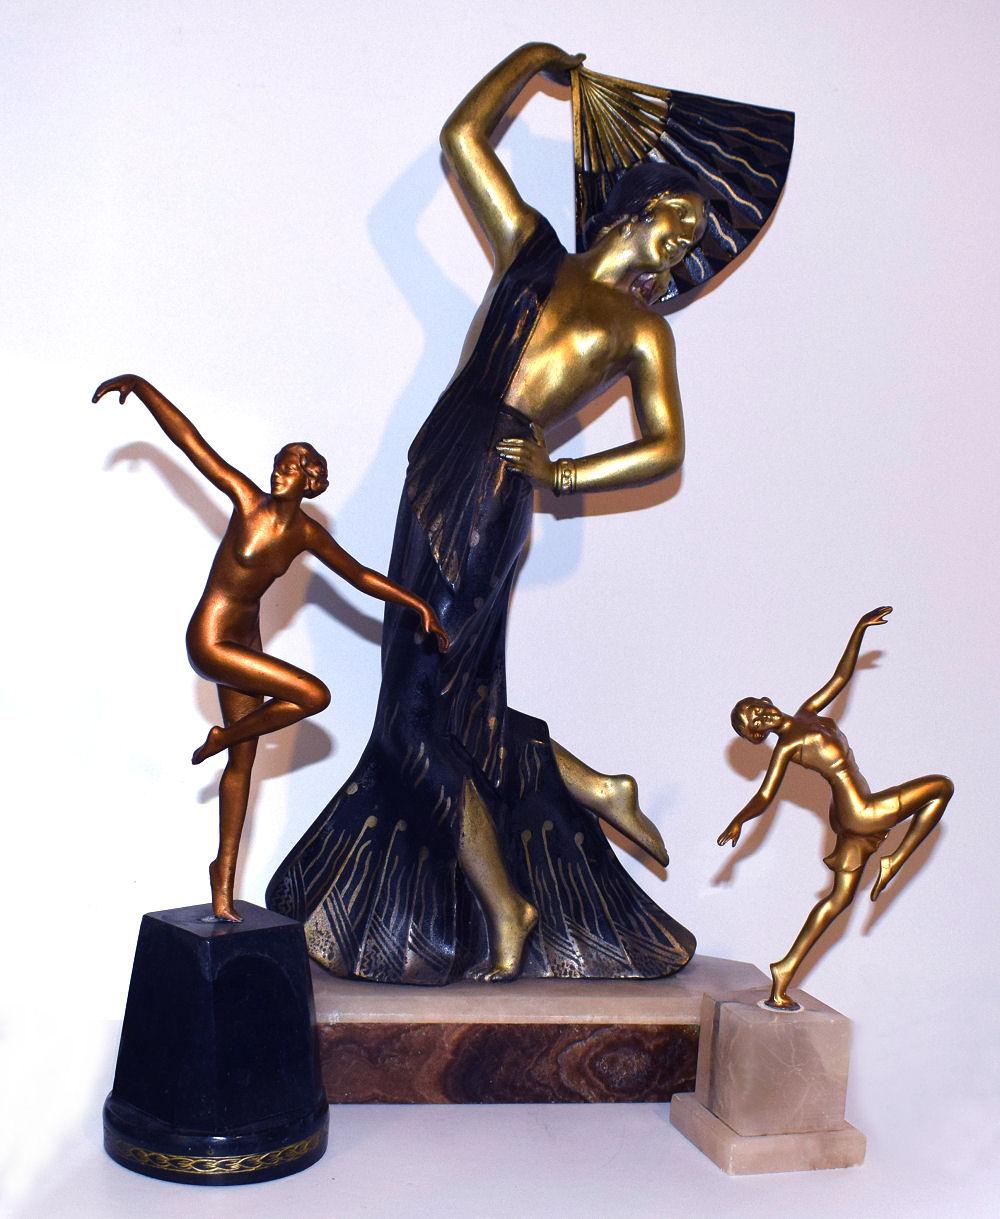 For your consideration is this Impressively large and beautiful Art Deco figure originating from Italy. These figures are not often found of this dimension, certainly we haven't had one for a few years now. She stands a whopping 20 inches tall, for